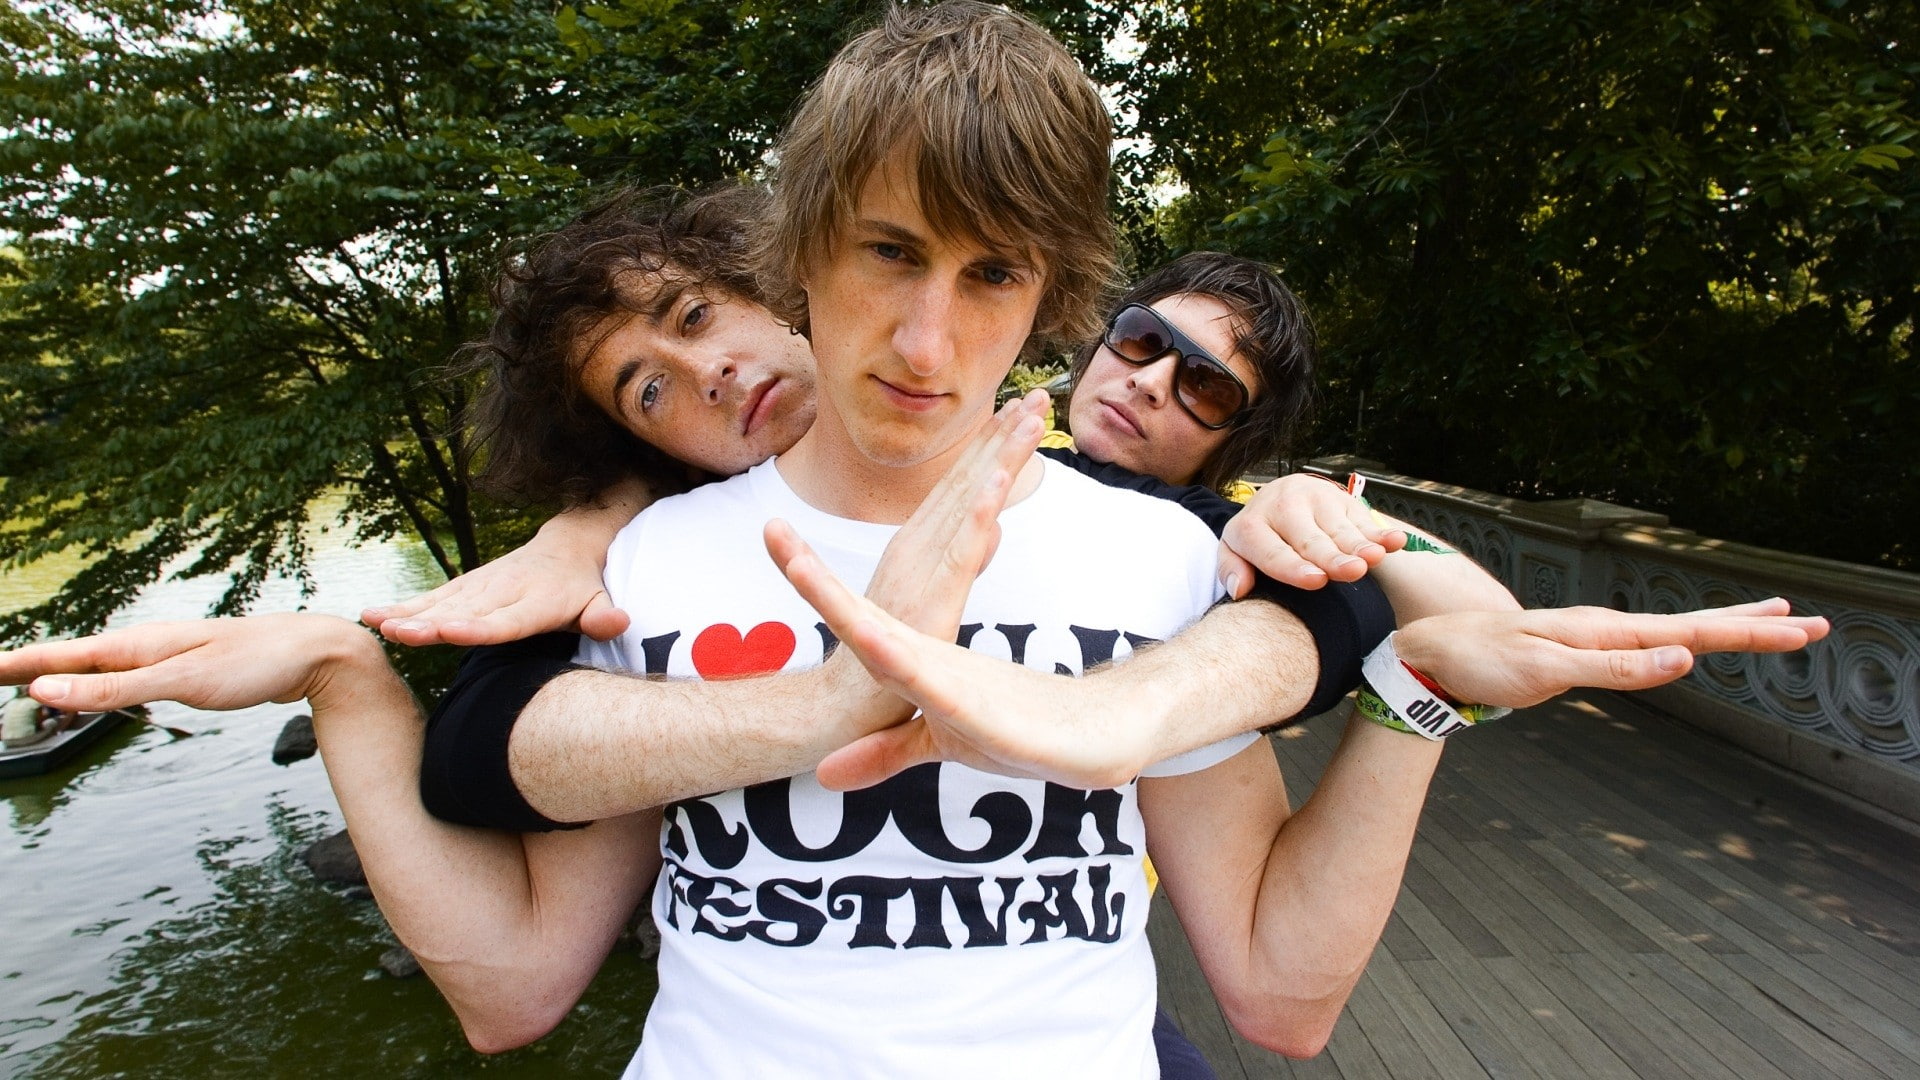 The wombats, Hands, Palms, Trees, Faces, togetherness, looking at camera